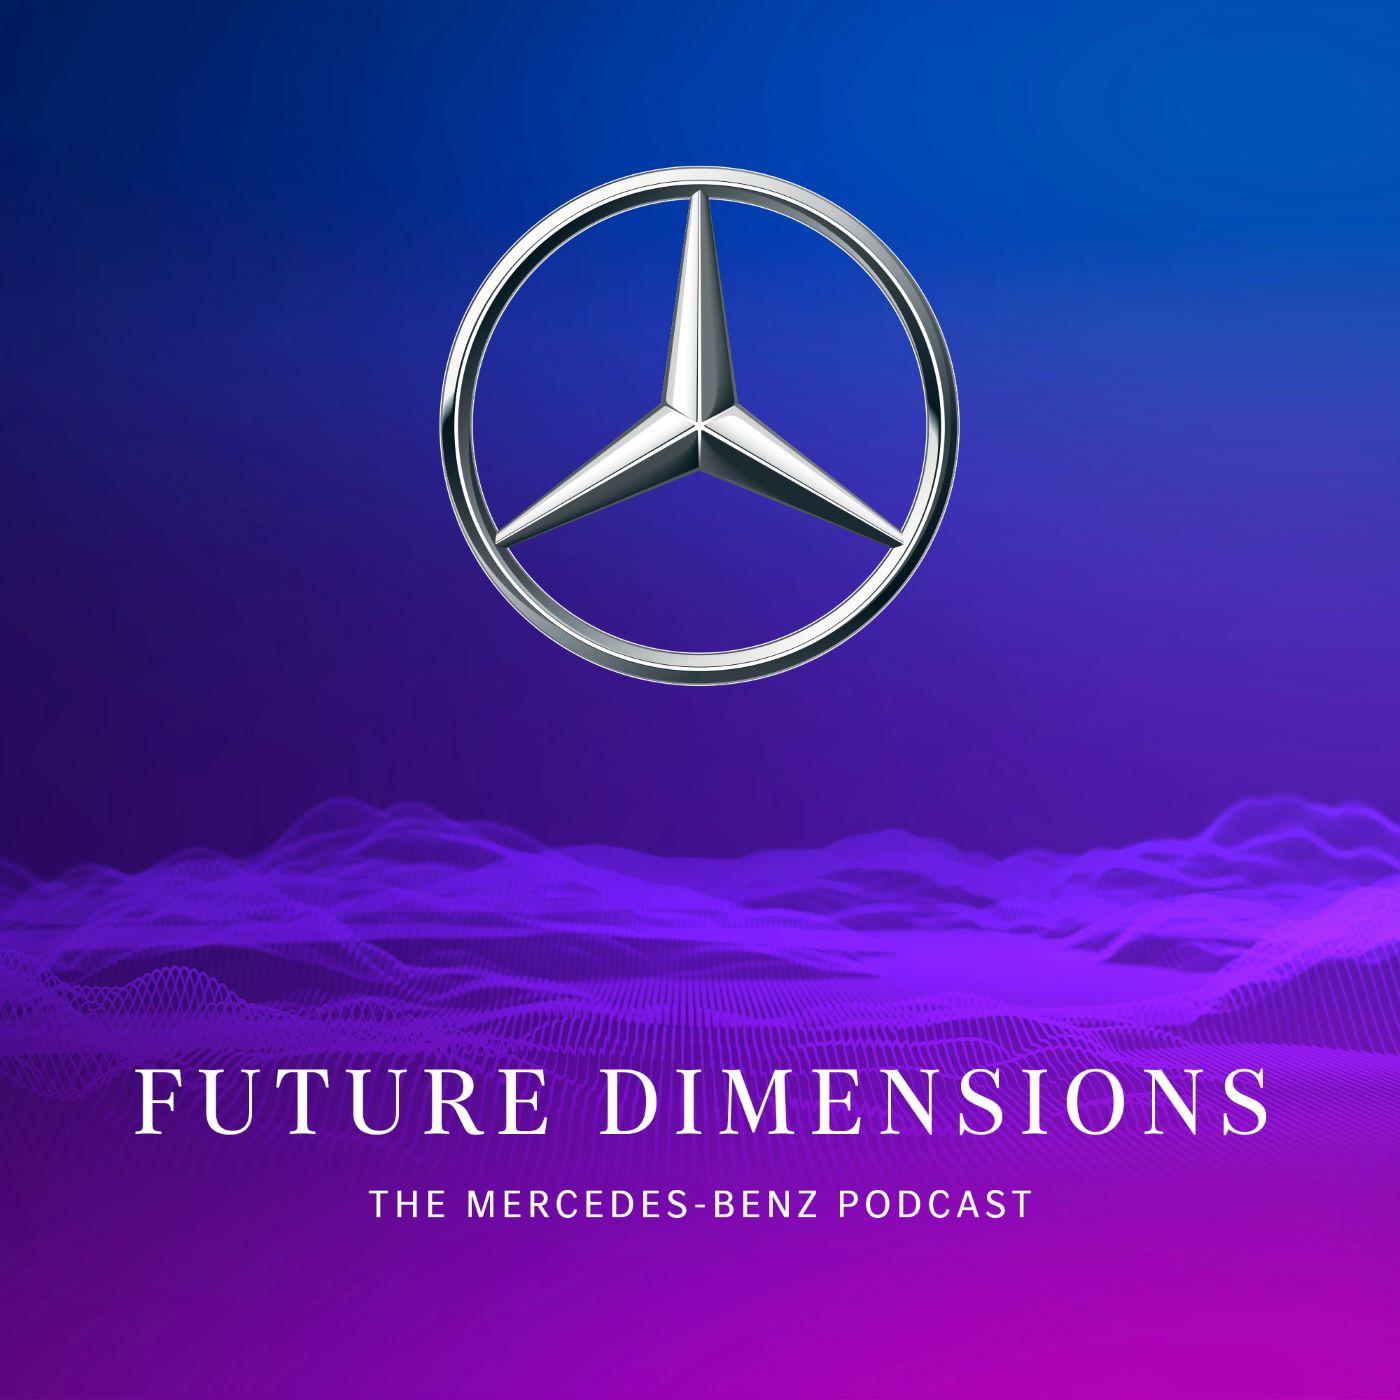 Future Dimensions – what if a better future was closer to us than we think?